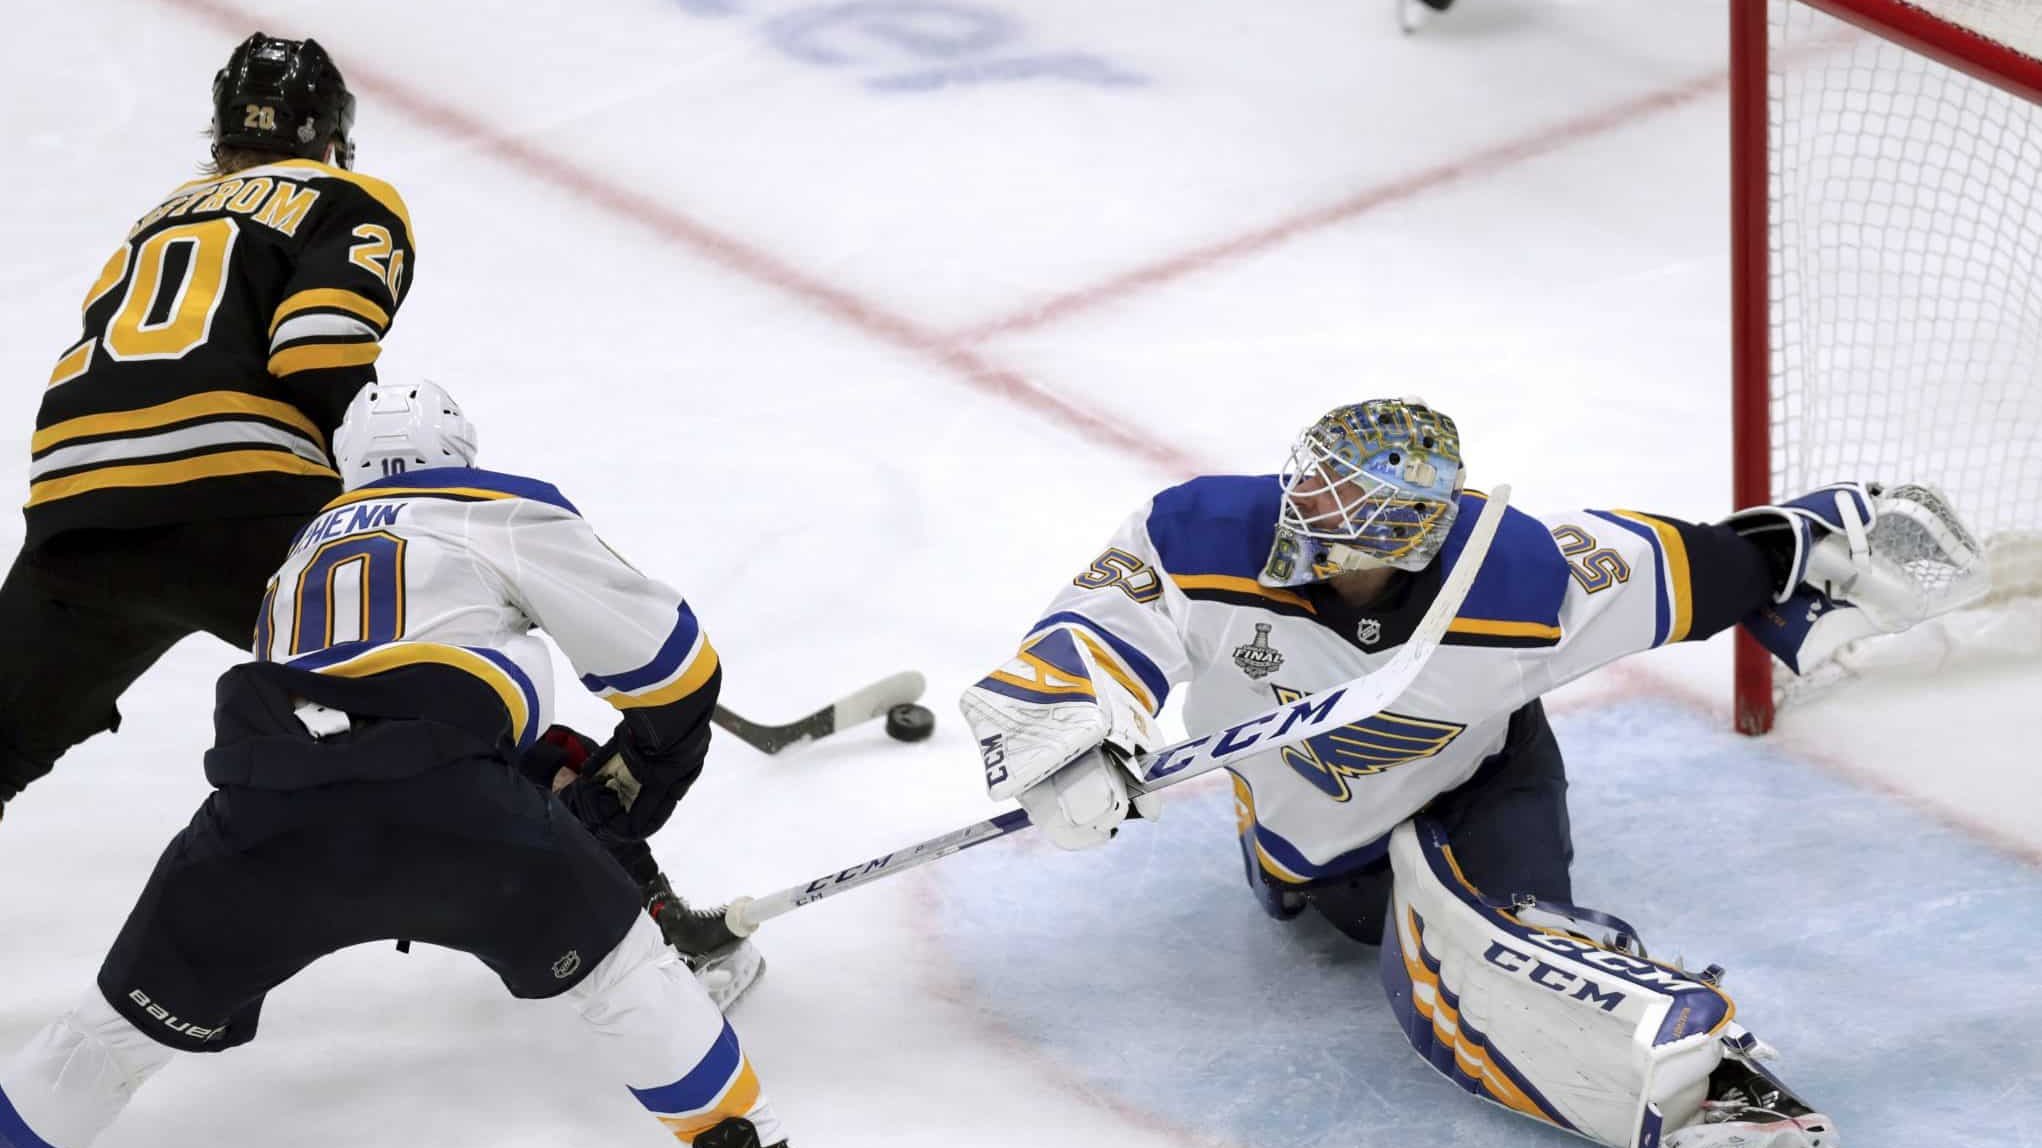 St. Louis Blues beat Boston Bruins, 4-1, to win first Stanley Cup